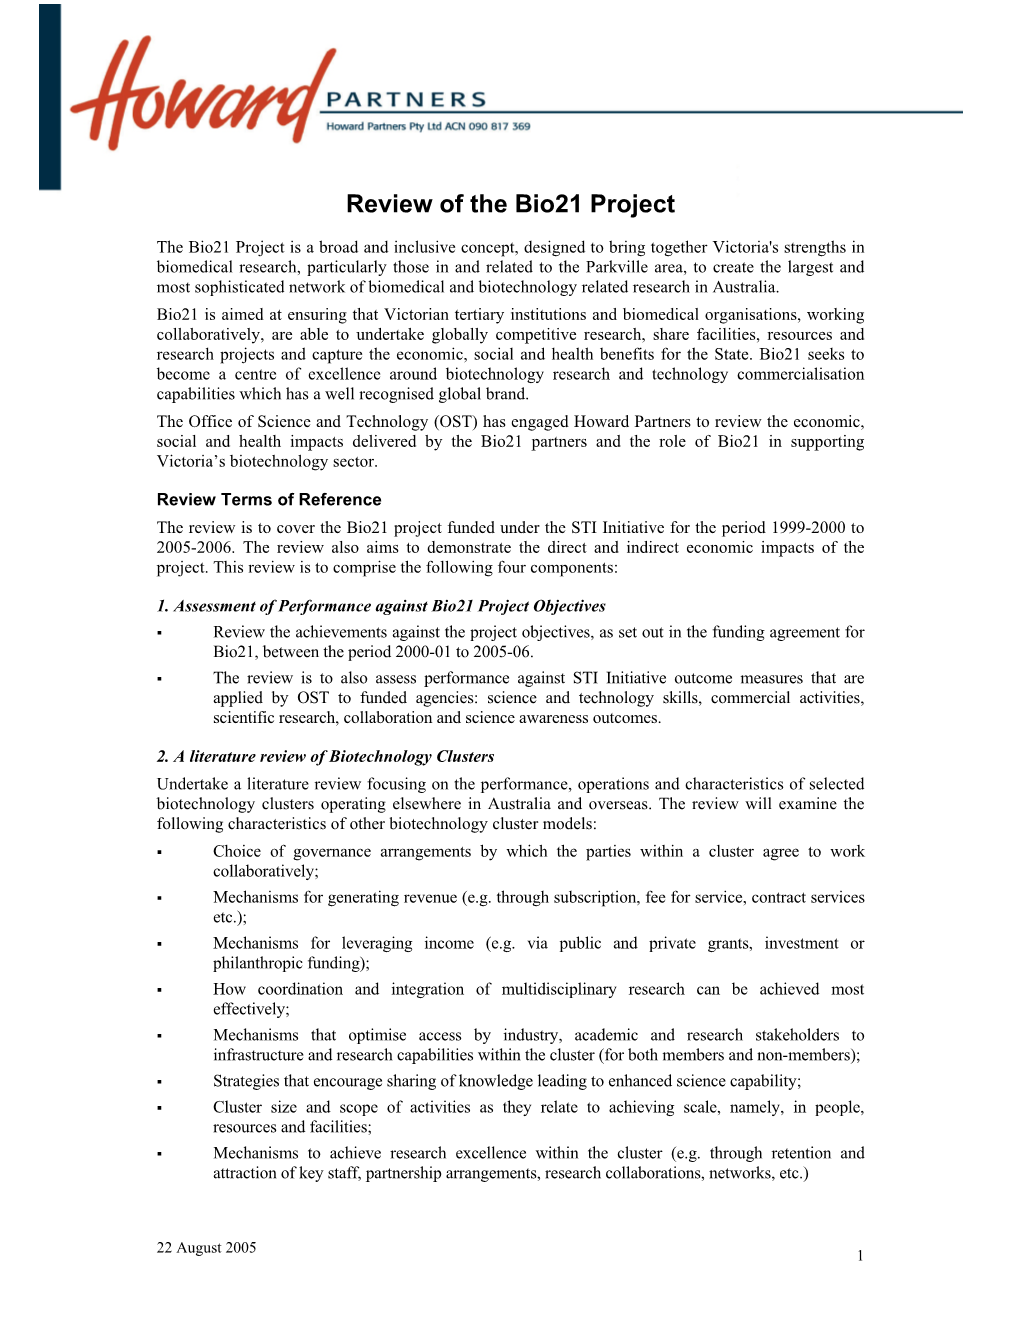 Review of the Bio21 Project